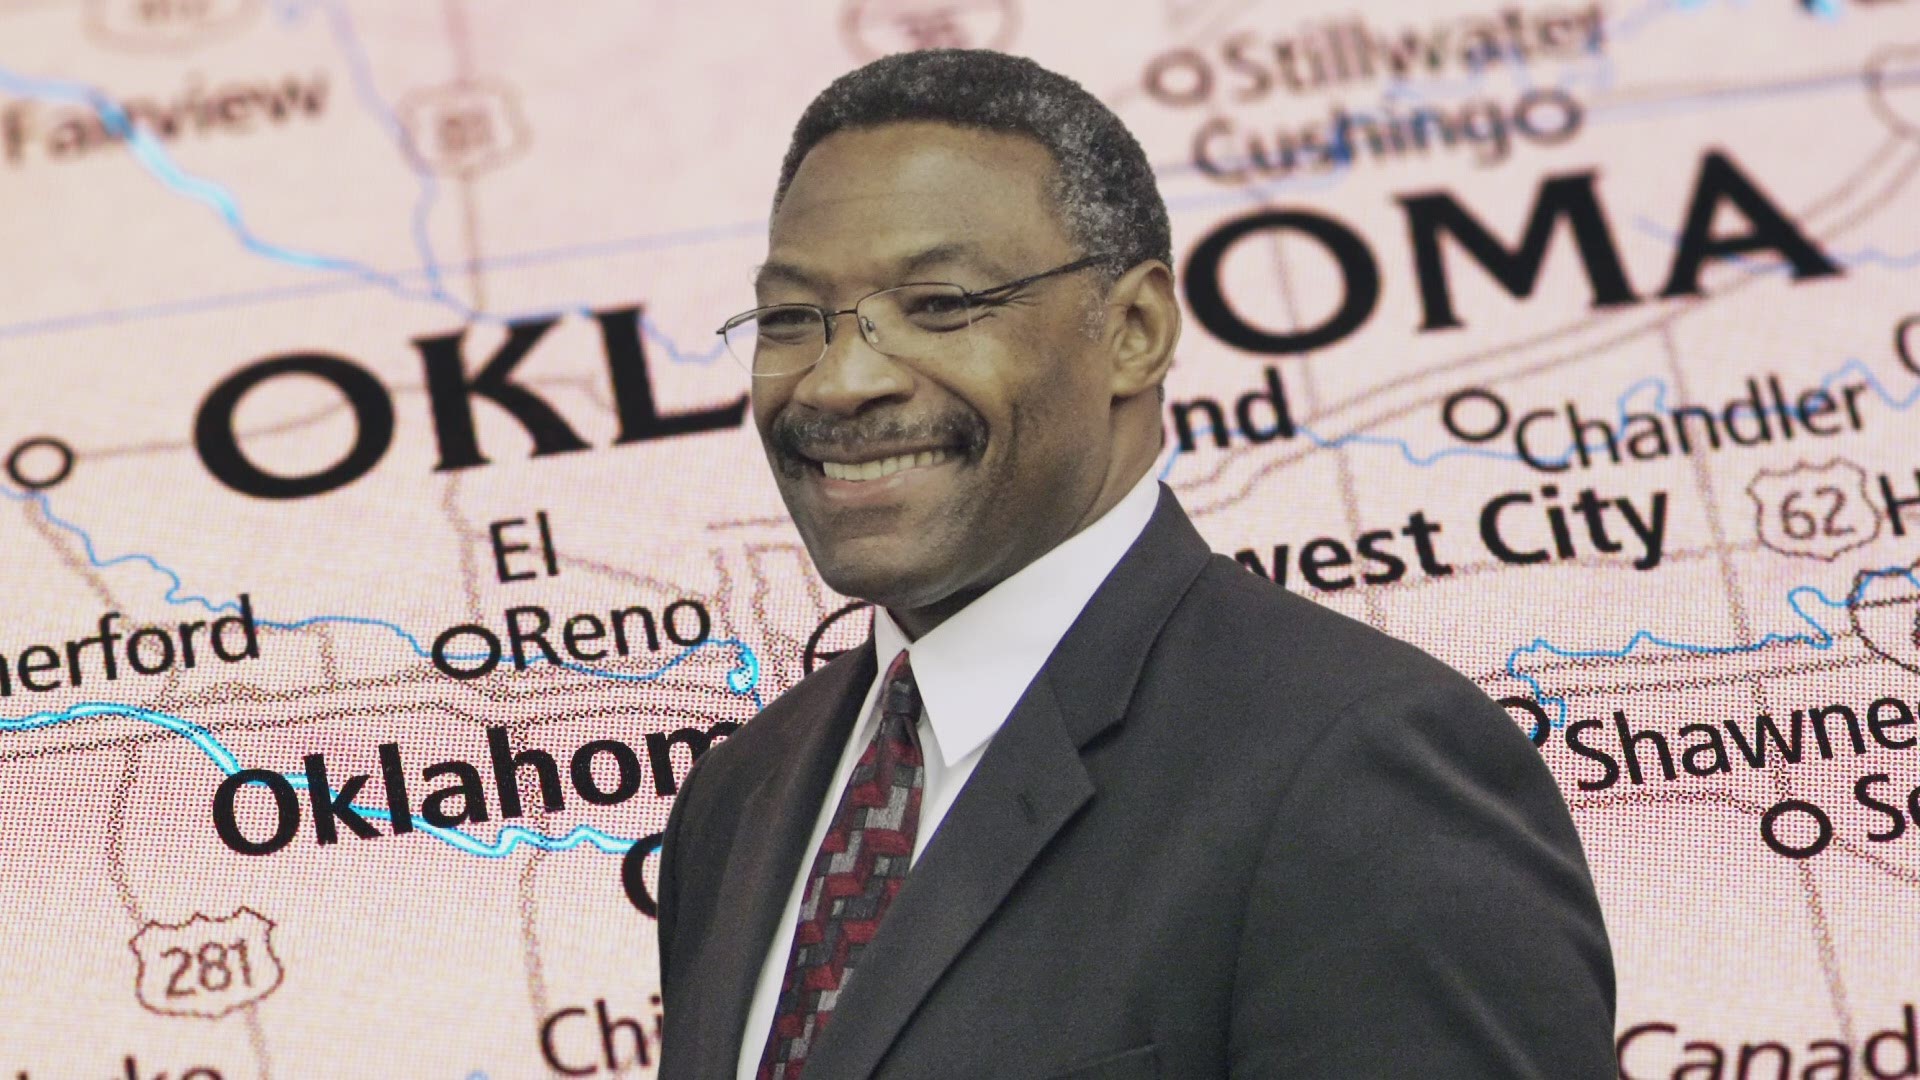 Lee Roy Selmon was so beloved throughout Tampa Bay, the expressway was named after him. https://on.wtsp.com/2IouKa8